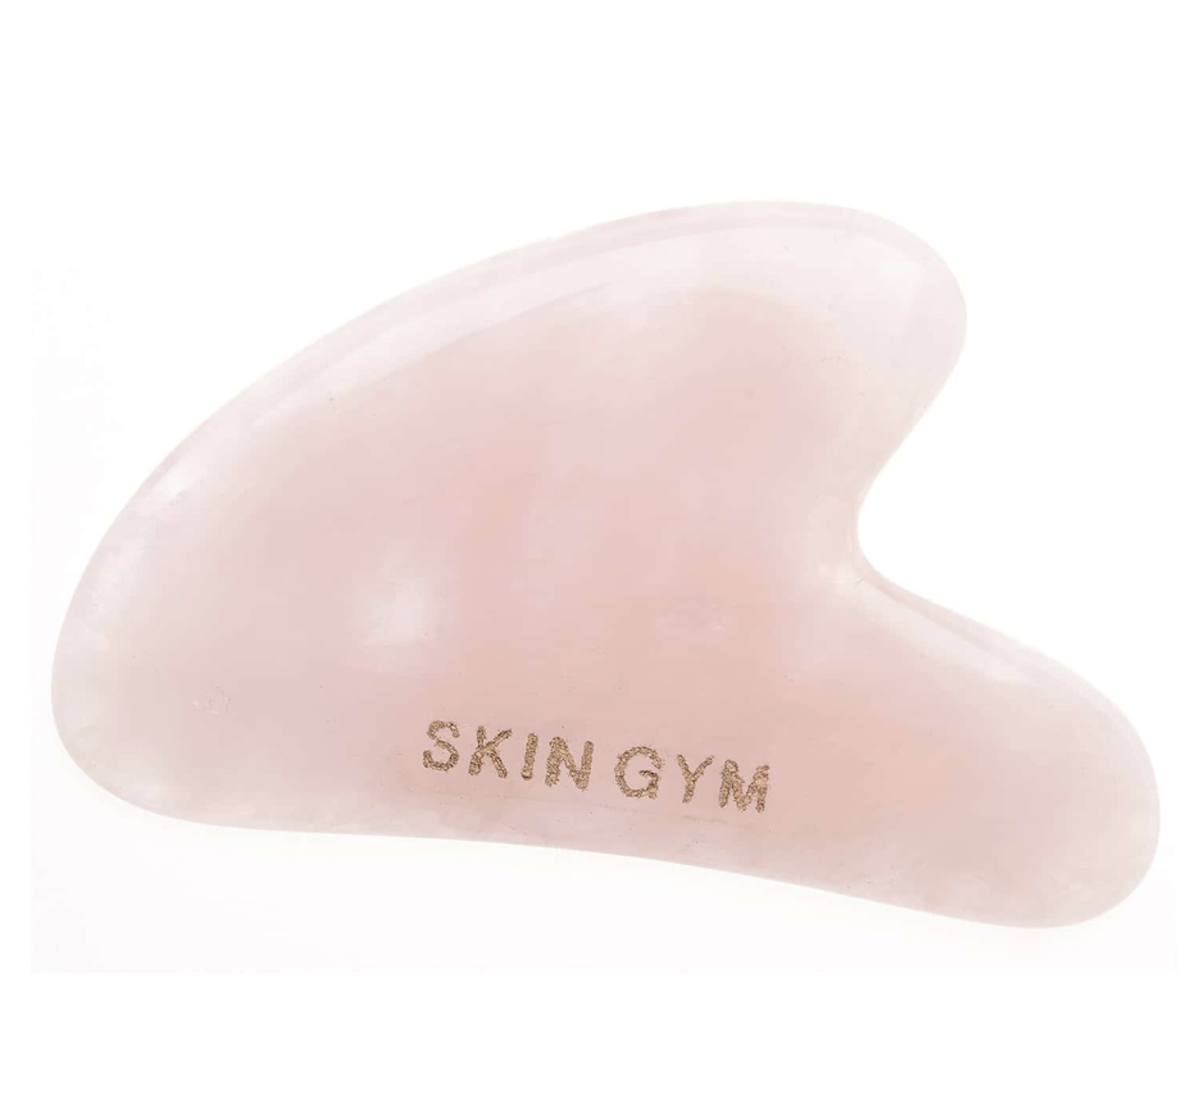 everything you need to know about gua sha